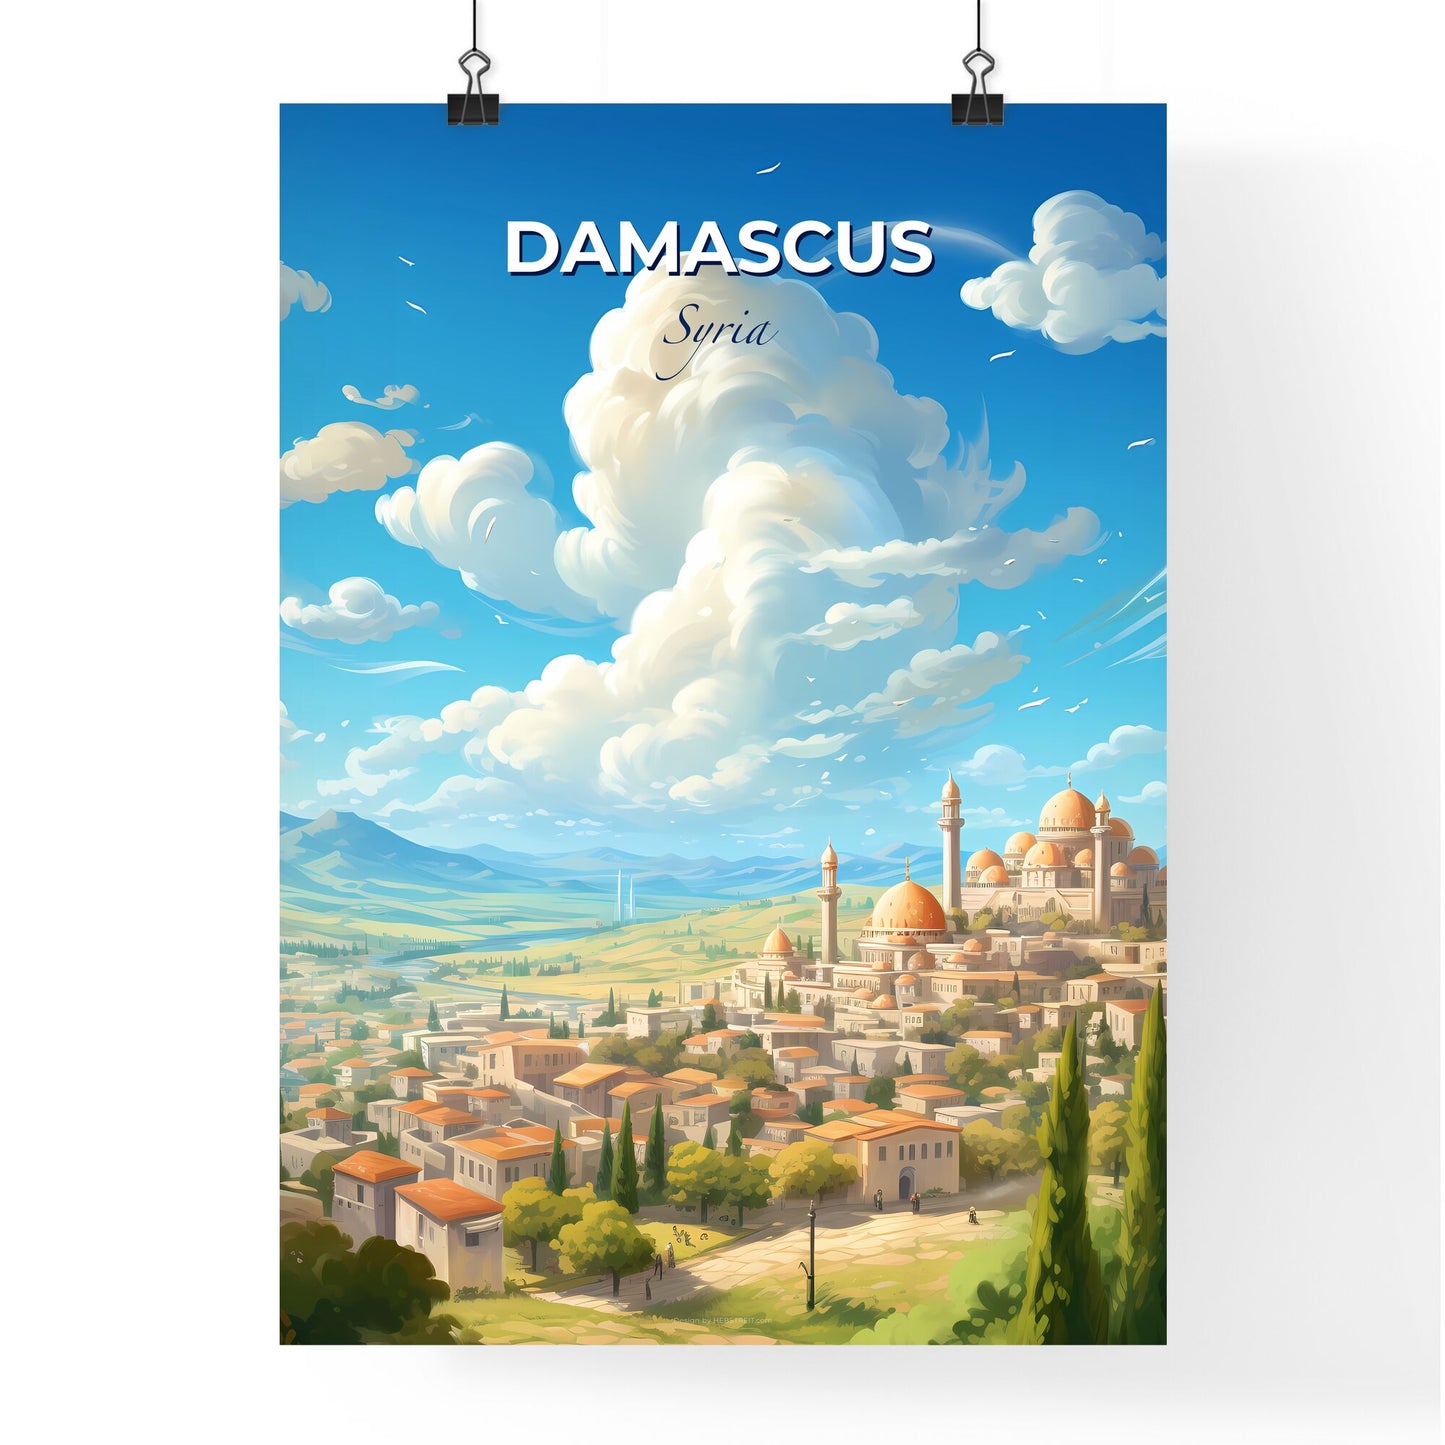 Damascus Syria Skyline - A City With Domes And Trees - Customizable Travel Gift Default Title